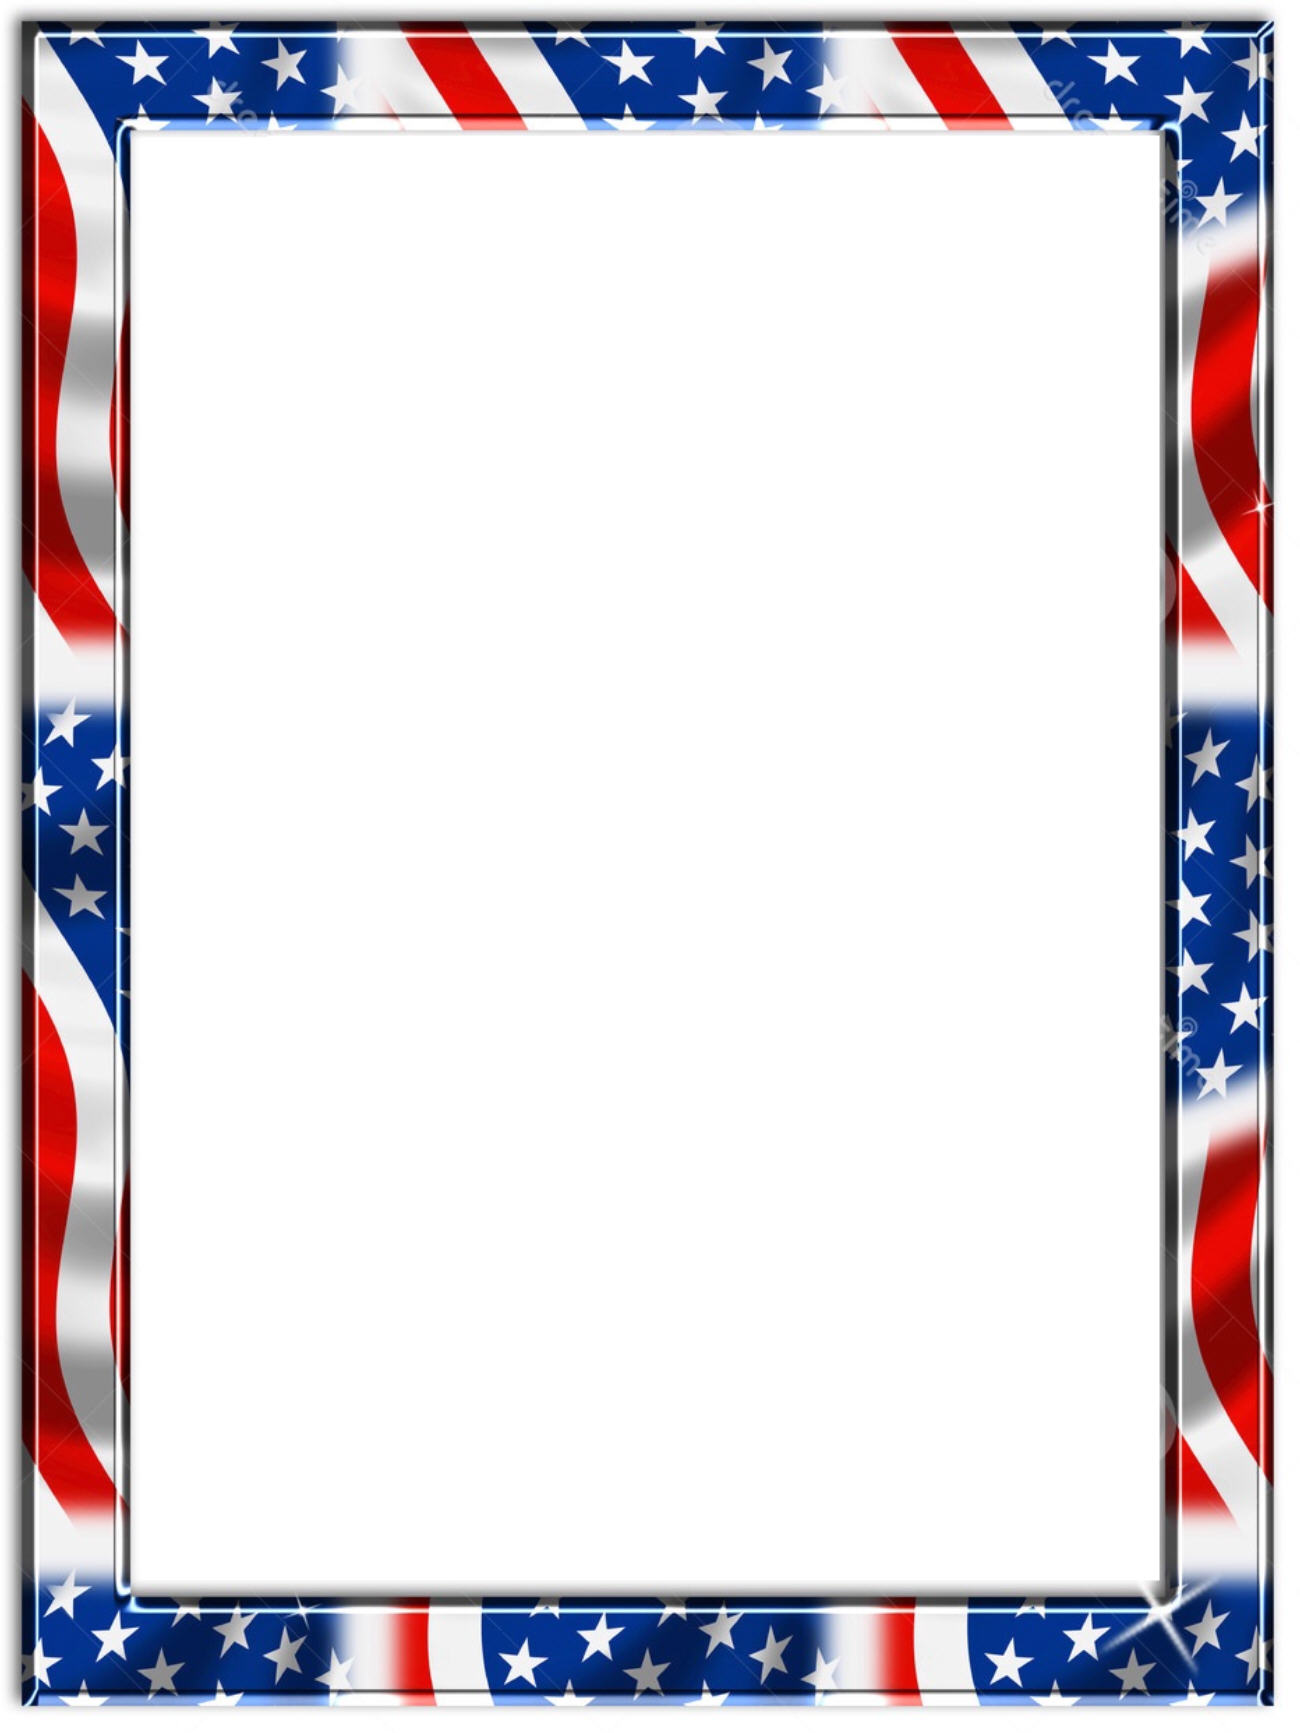 Veterans Day Border Free download on ClipArtMag